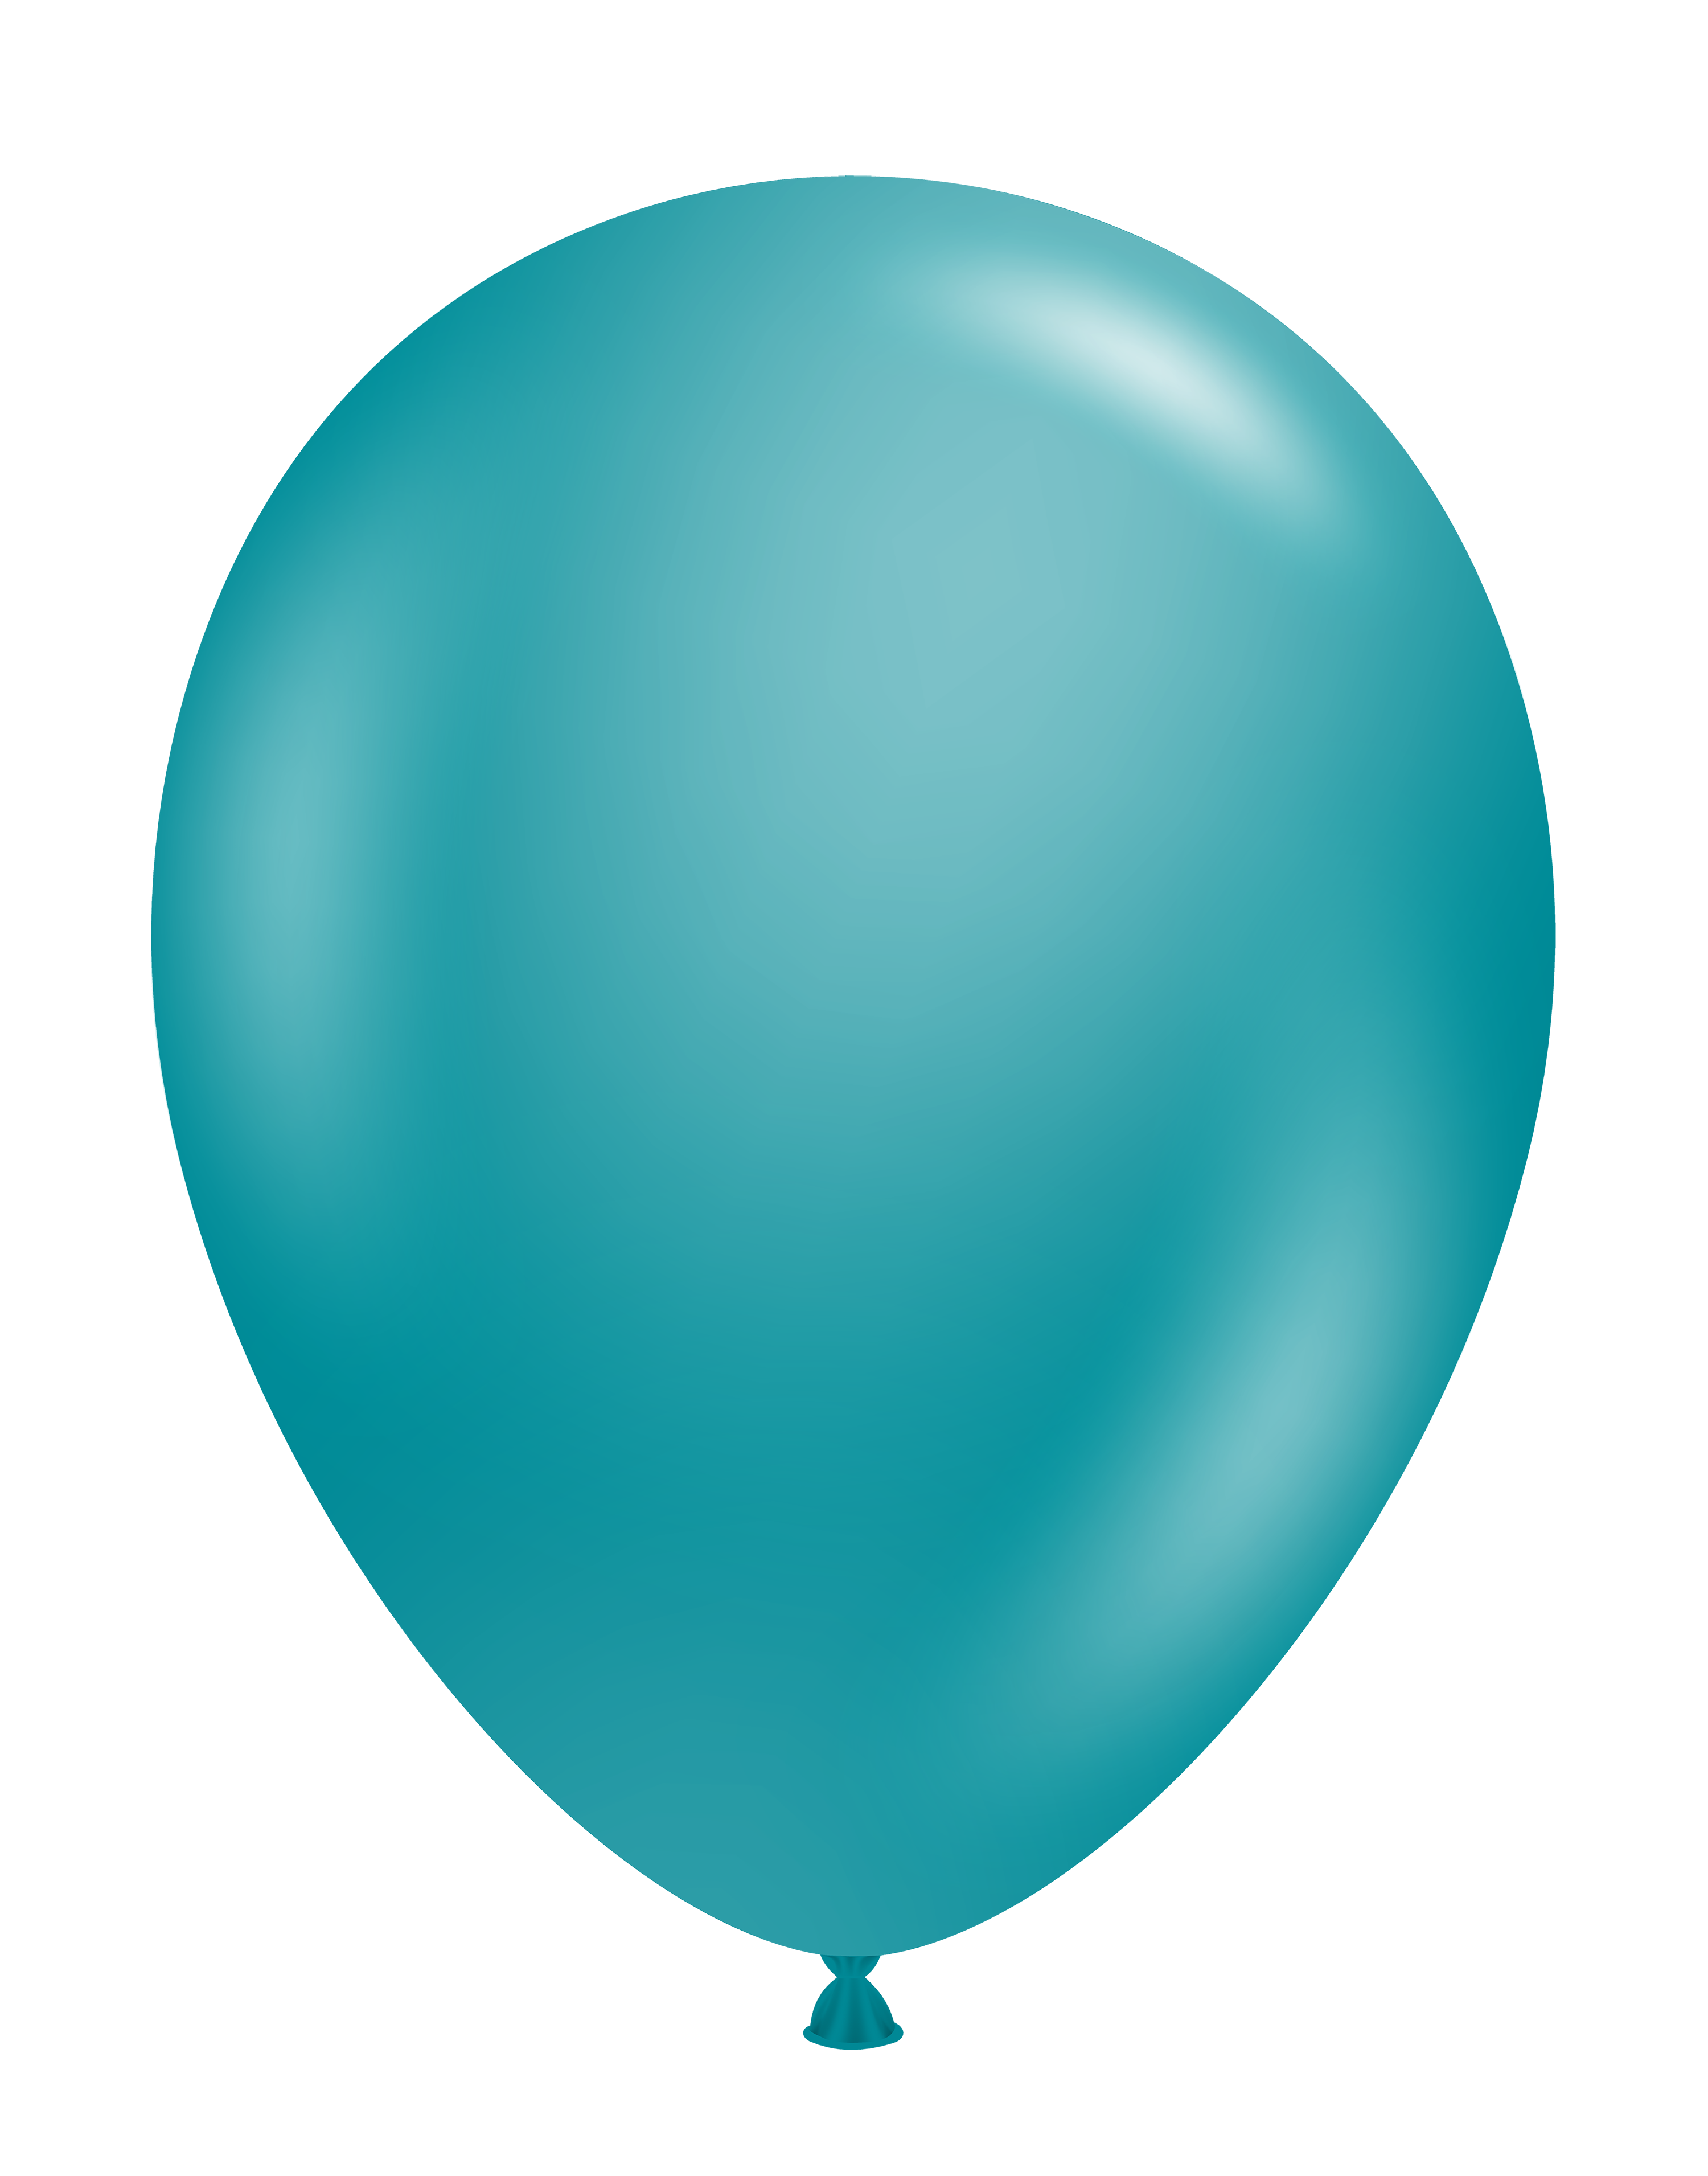 5" TUFTEX Metallic Pearlized Teal Latex Balloons | 50 Count